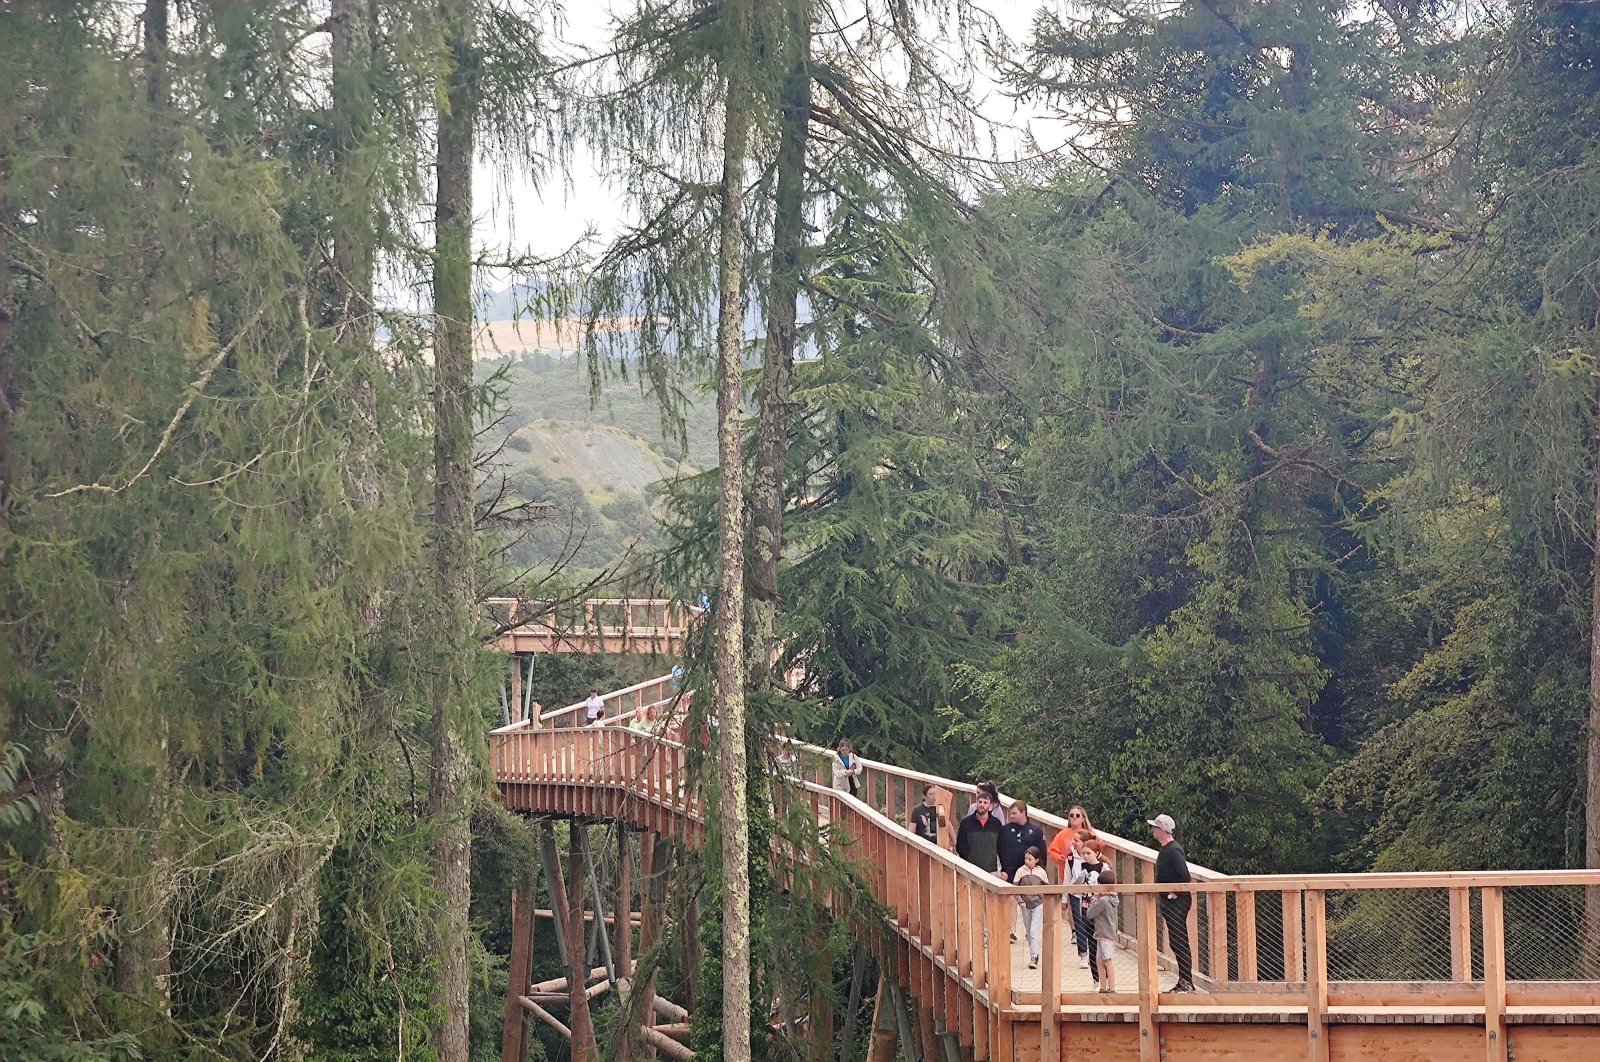 Ireland&#039;s new treetop walk takes visitors over a forest park by the Wicklow Mountains and is fast becoming a major tourist landmark for Dublin visitors, Dublin, Ireland, July 30, 2022. (dpa Photo)